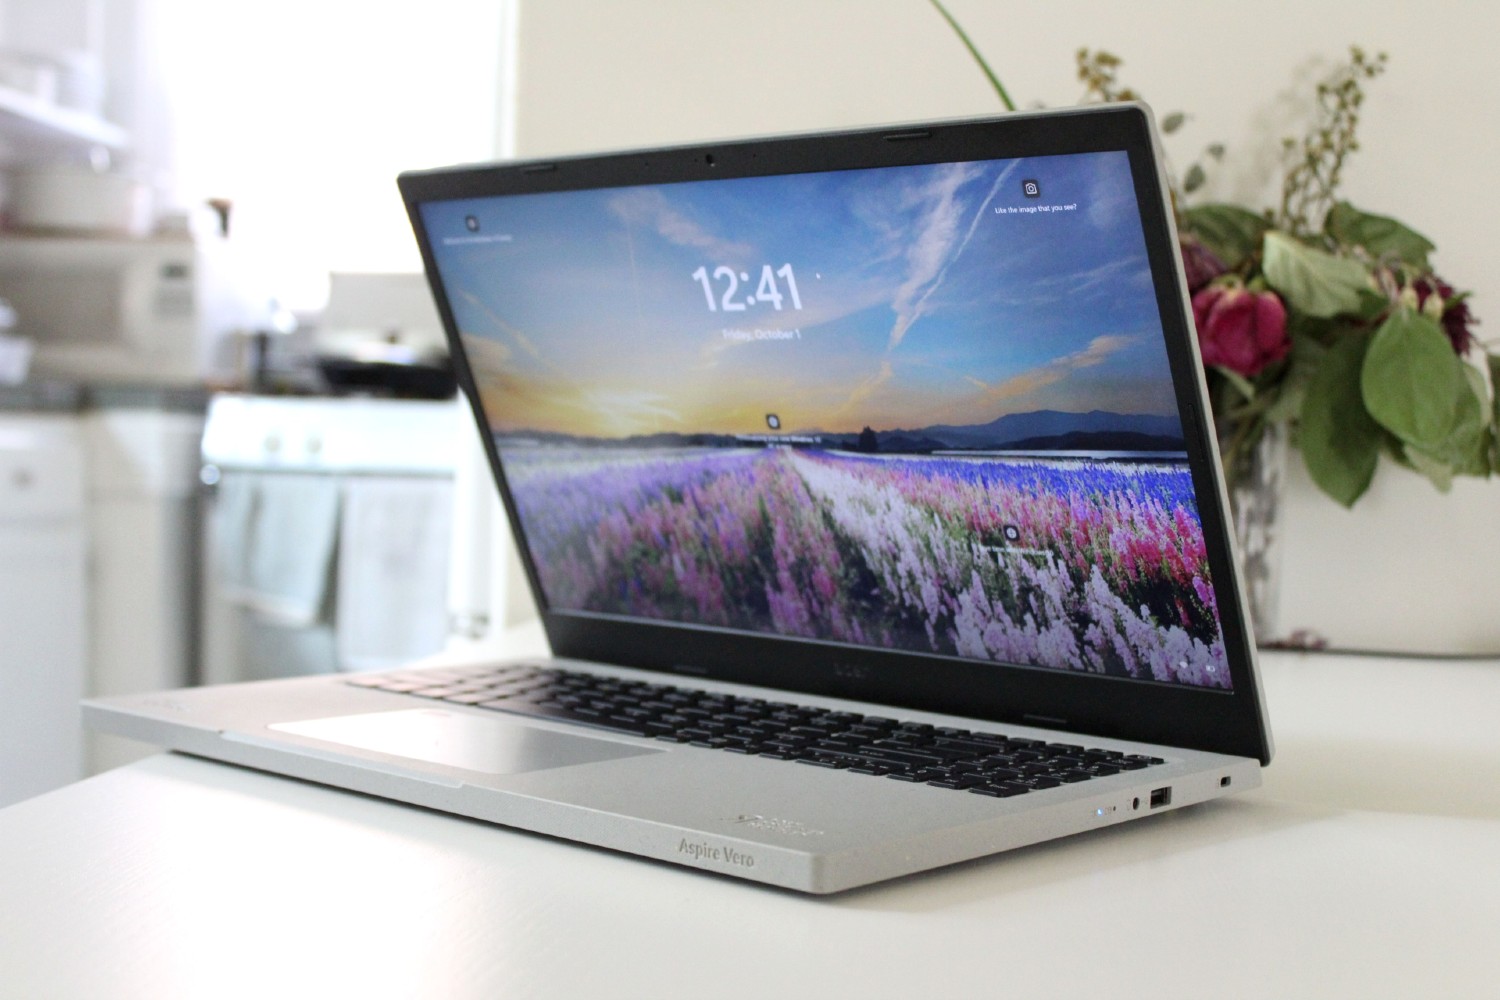 Acer Aspire Vero Review: The Sustainable Windows 11 Laptop